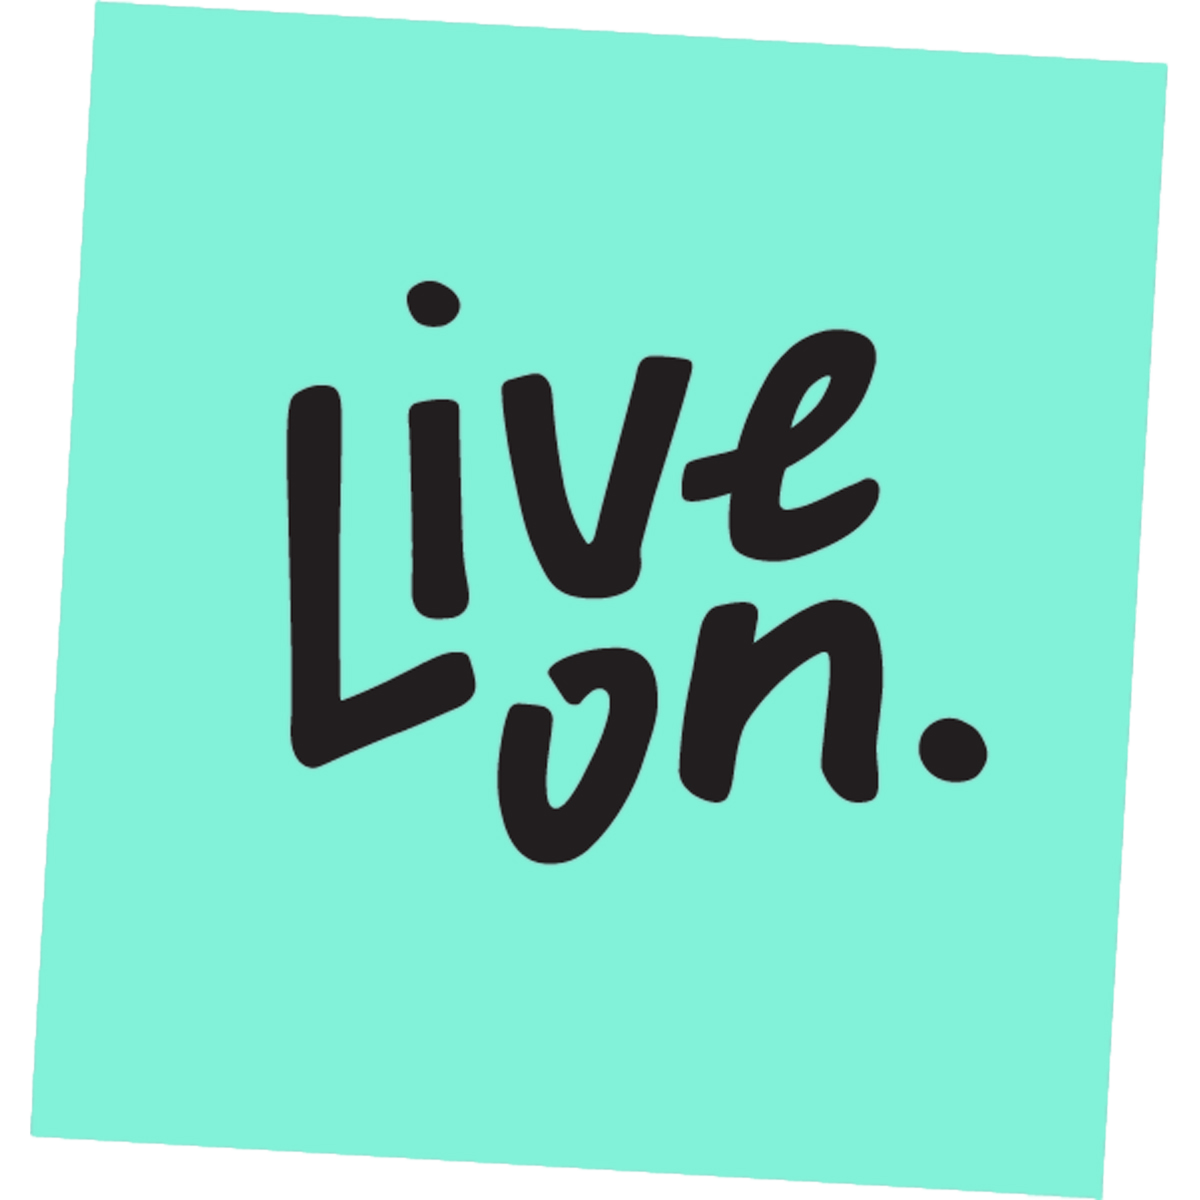 The text "Live on." in a tilted cyan colored square